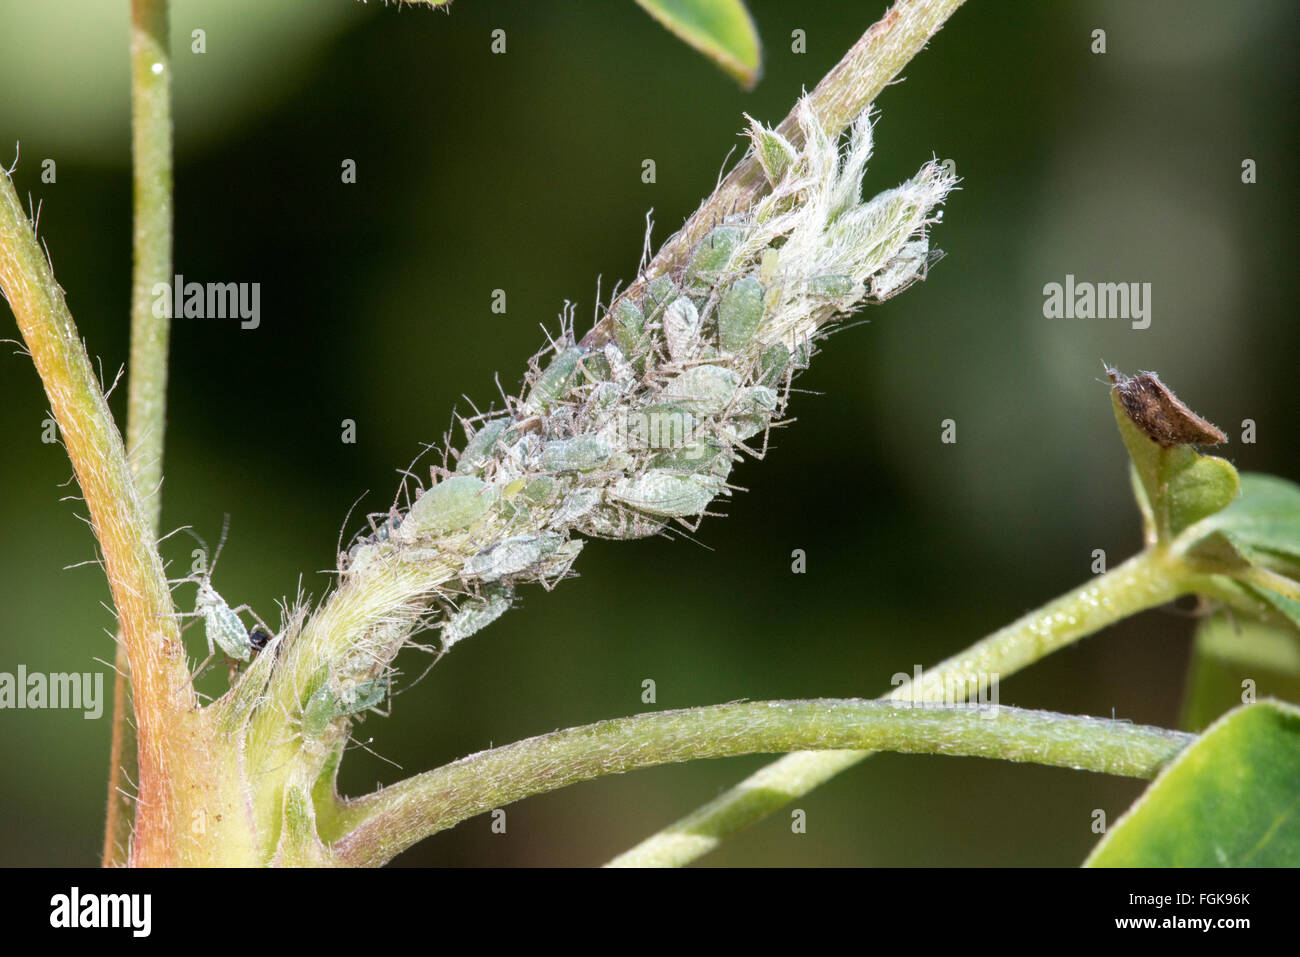 Aphids on Lupin plant Stock Photo